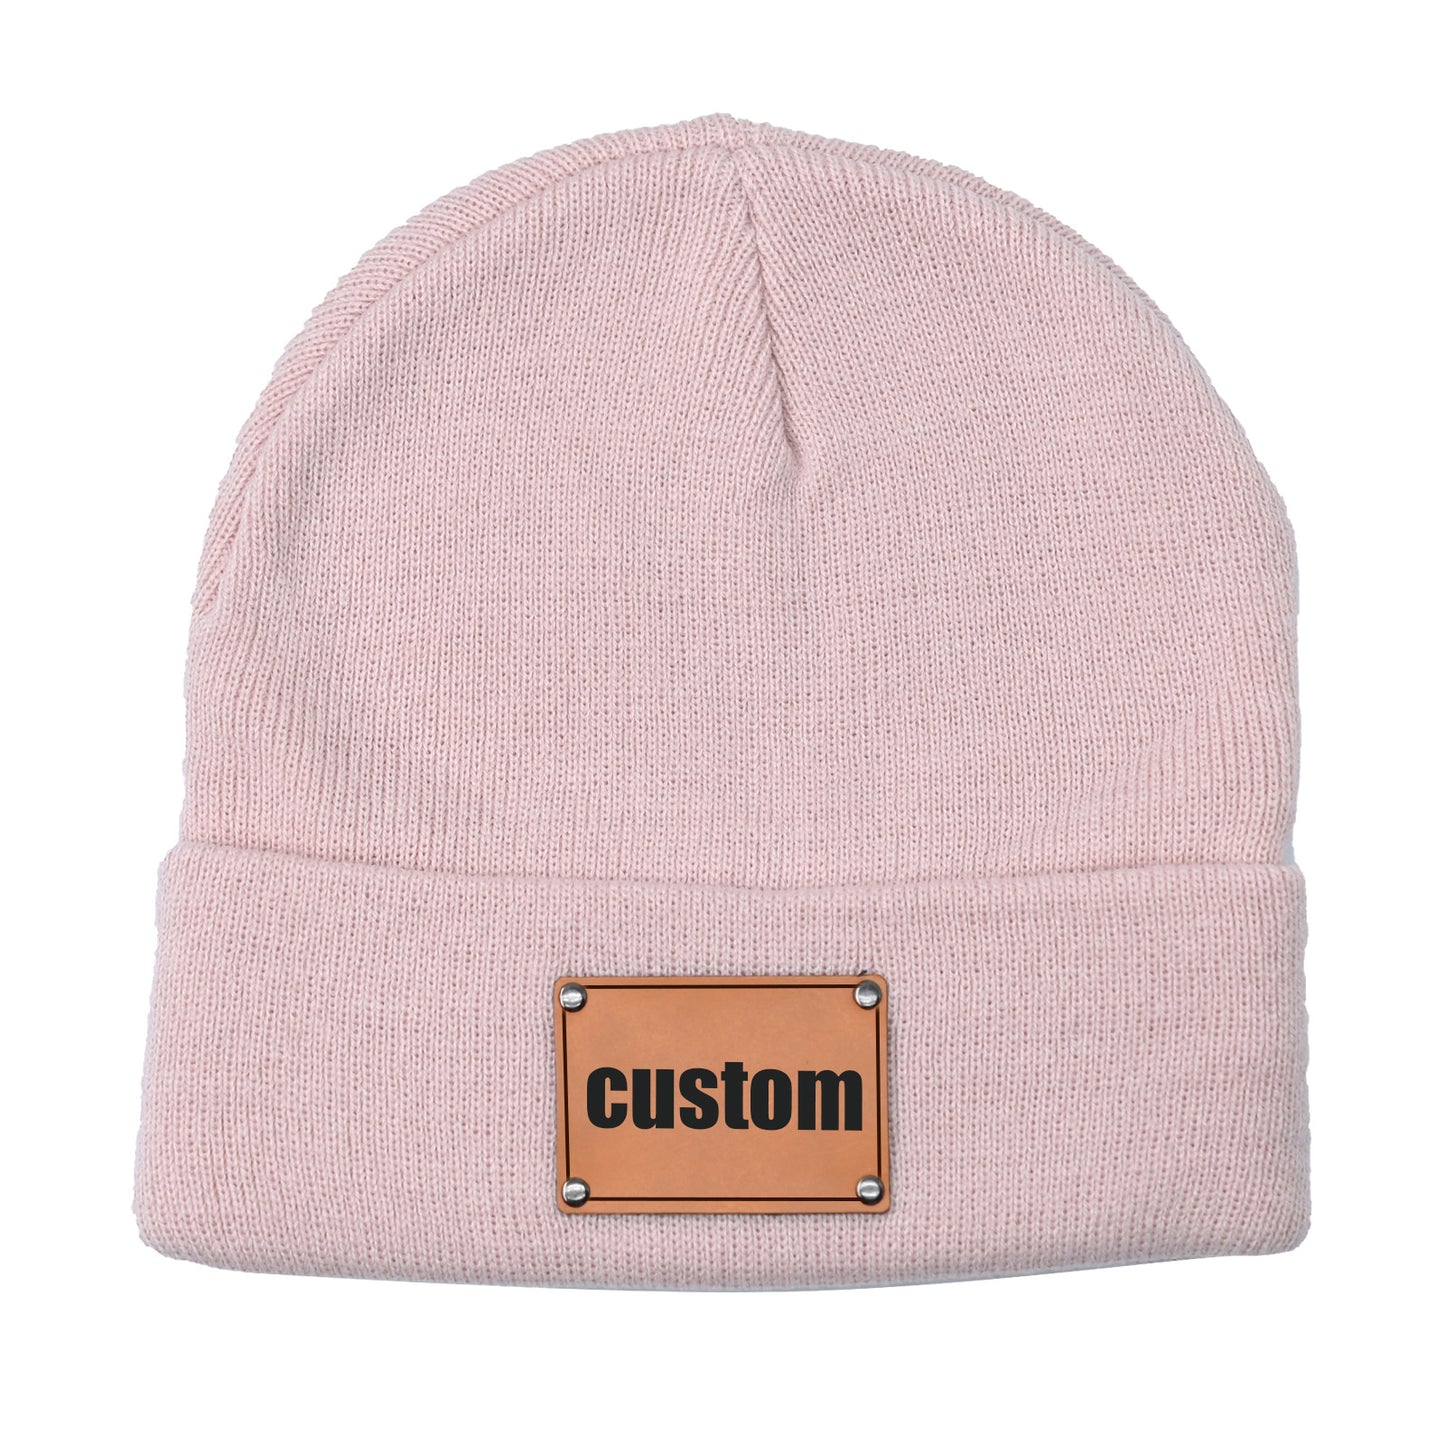 Engraved Beanie, Knitted Baby Beanie For Toddlers Boys Girls Adults